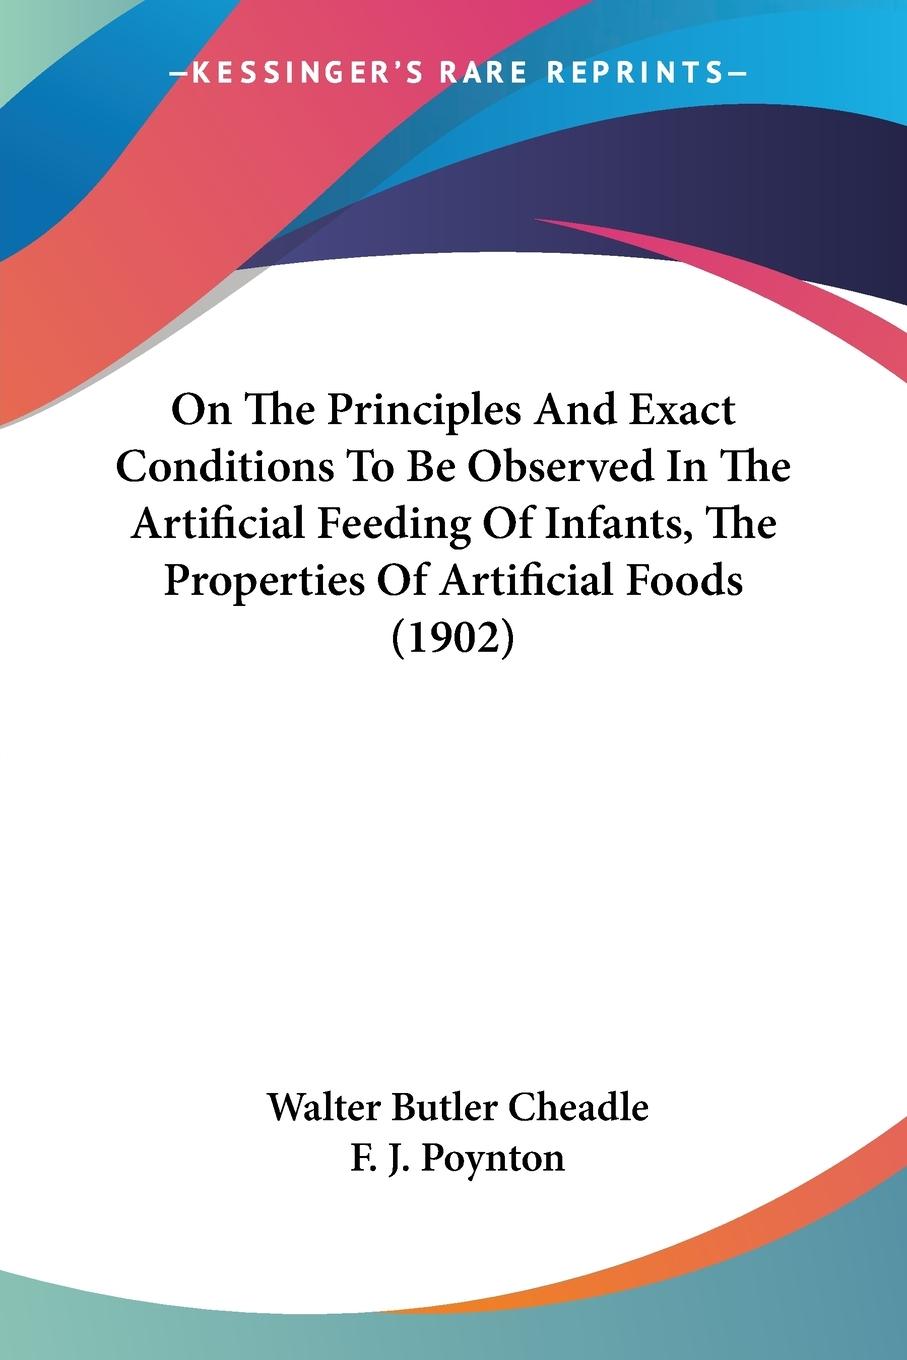 On The Principles And Exact Conditions To Be Observed In The Artificial Feeding Of Infants, The Properties Of Artificial Foods (1902) - Cheadle, Walter Butler